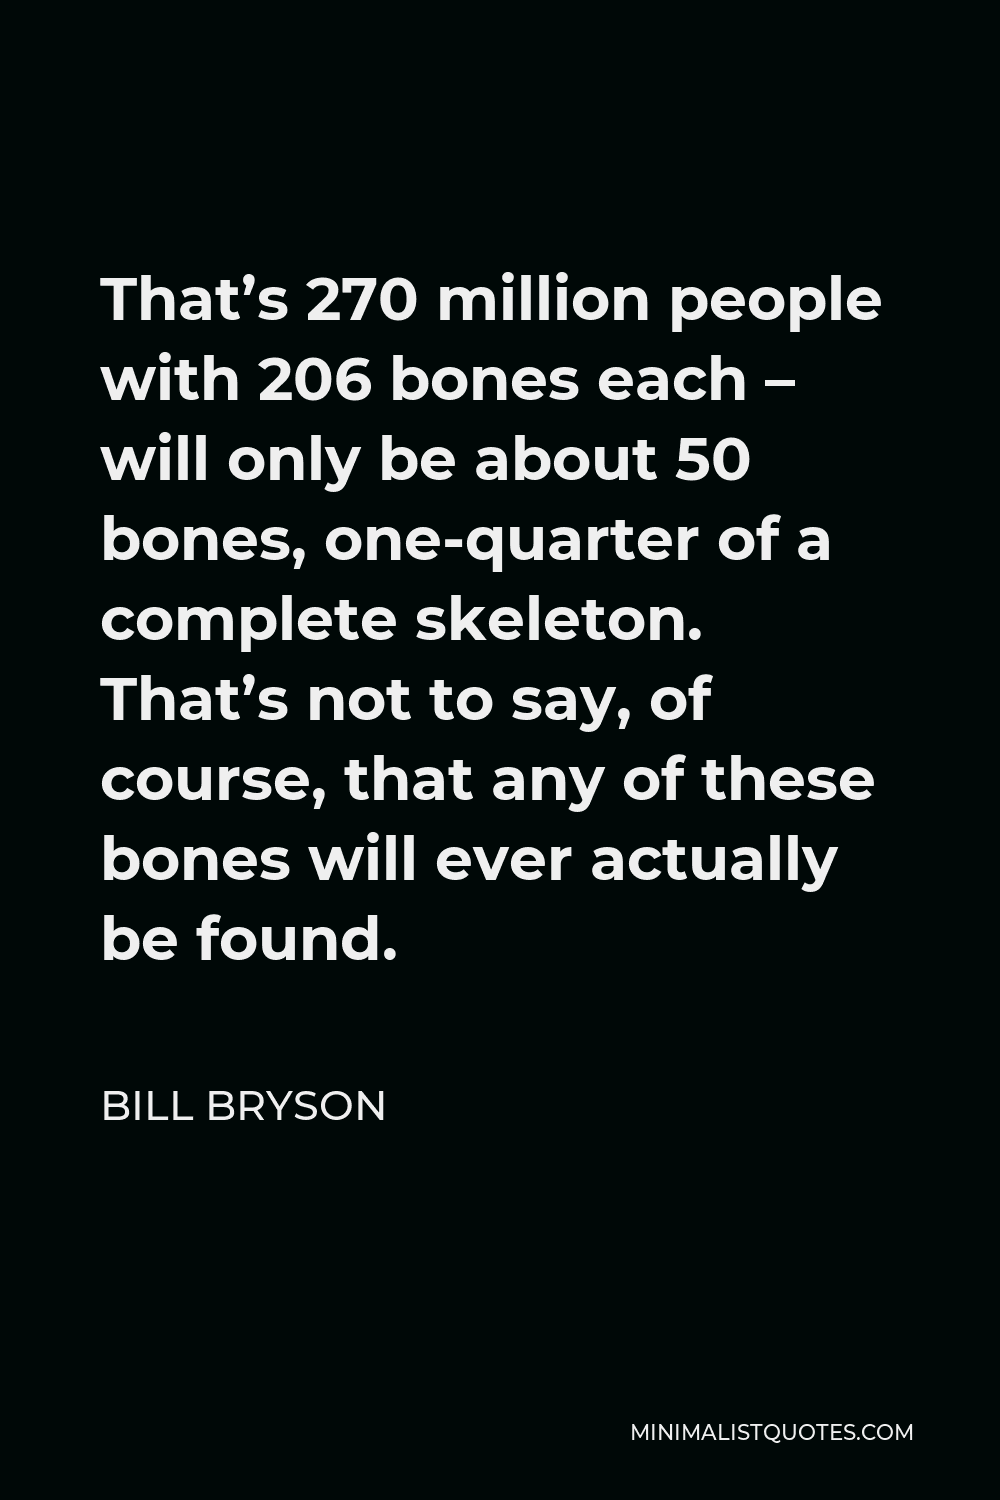 Bill Bryson Quote - That’s 270 million people with 206 bones each – will only be about 50 bones, one-quarter of a complete skeleton. That’s not to say, of course, that any of these bones will ever actually be found.